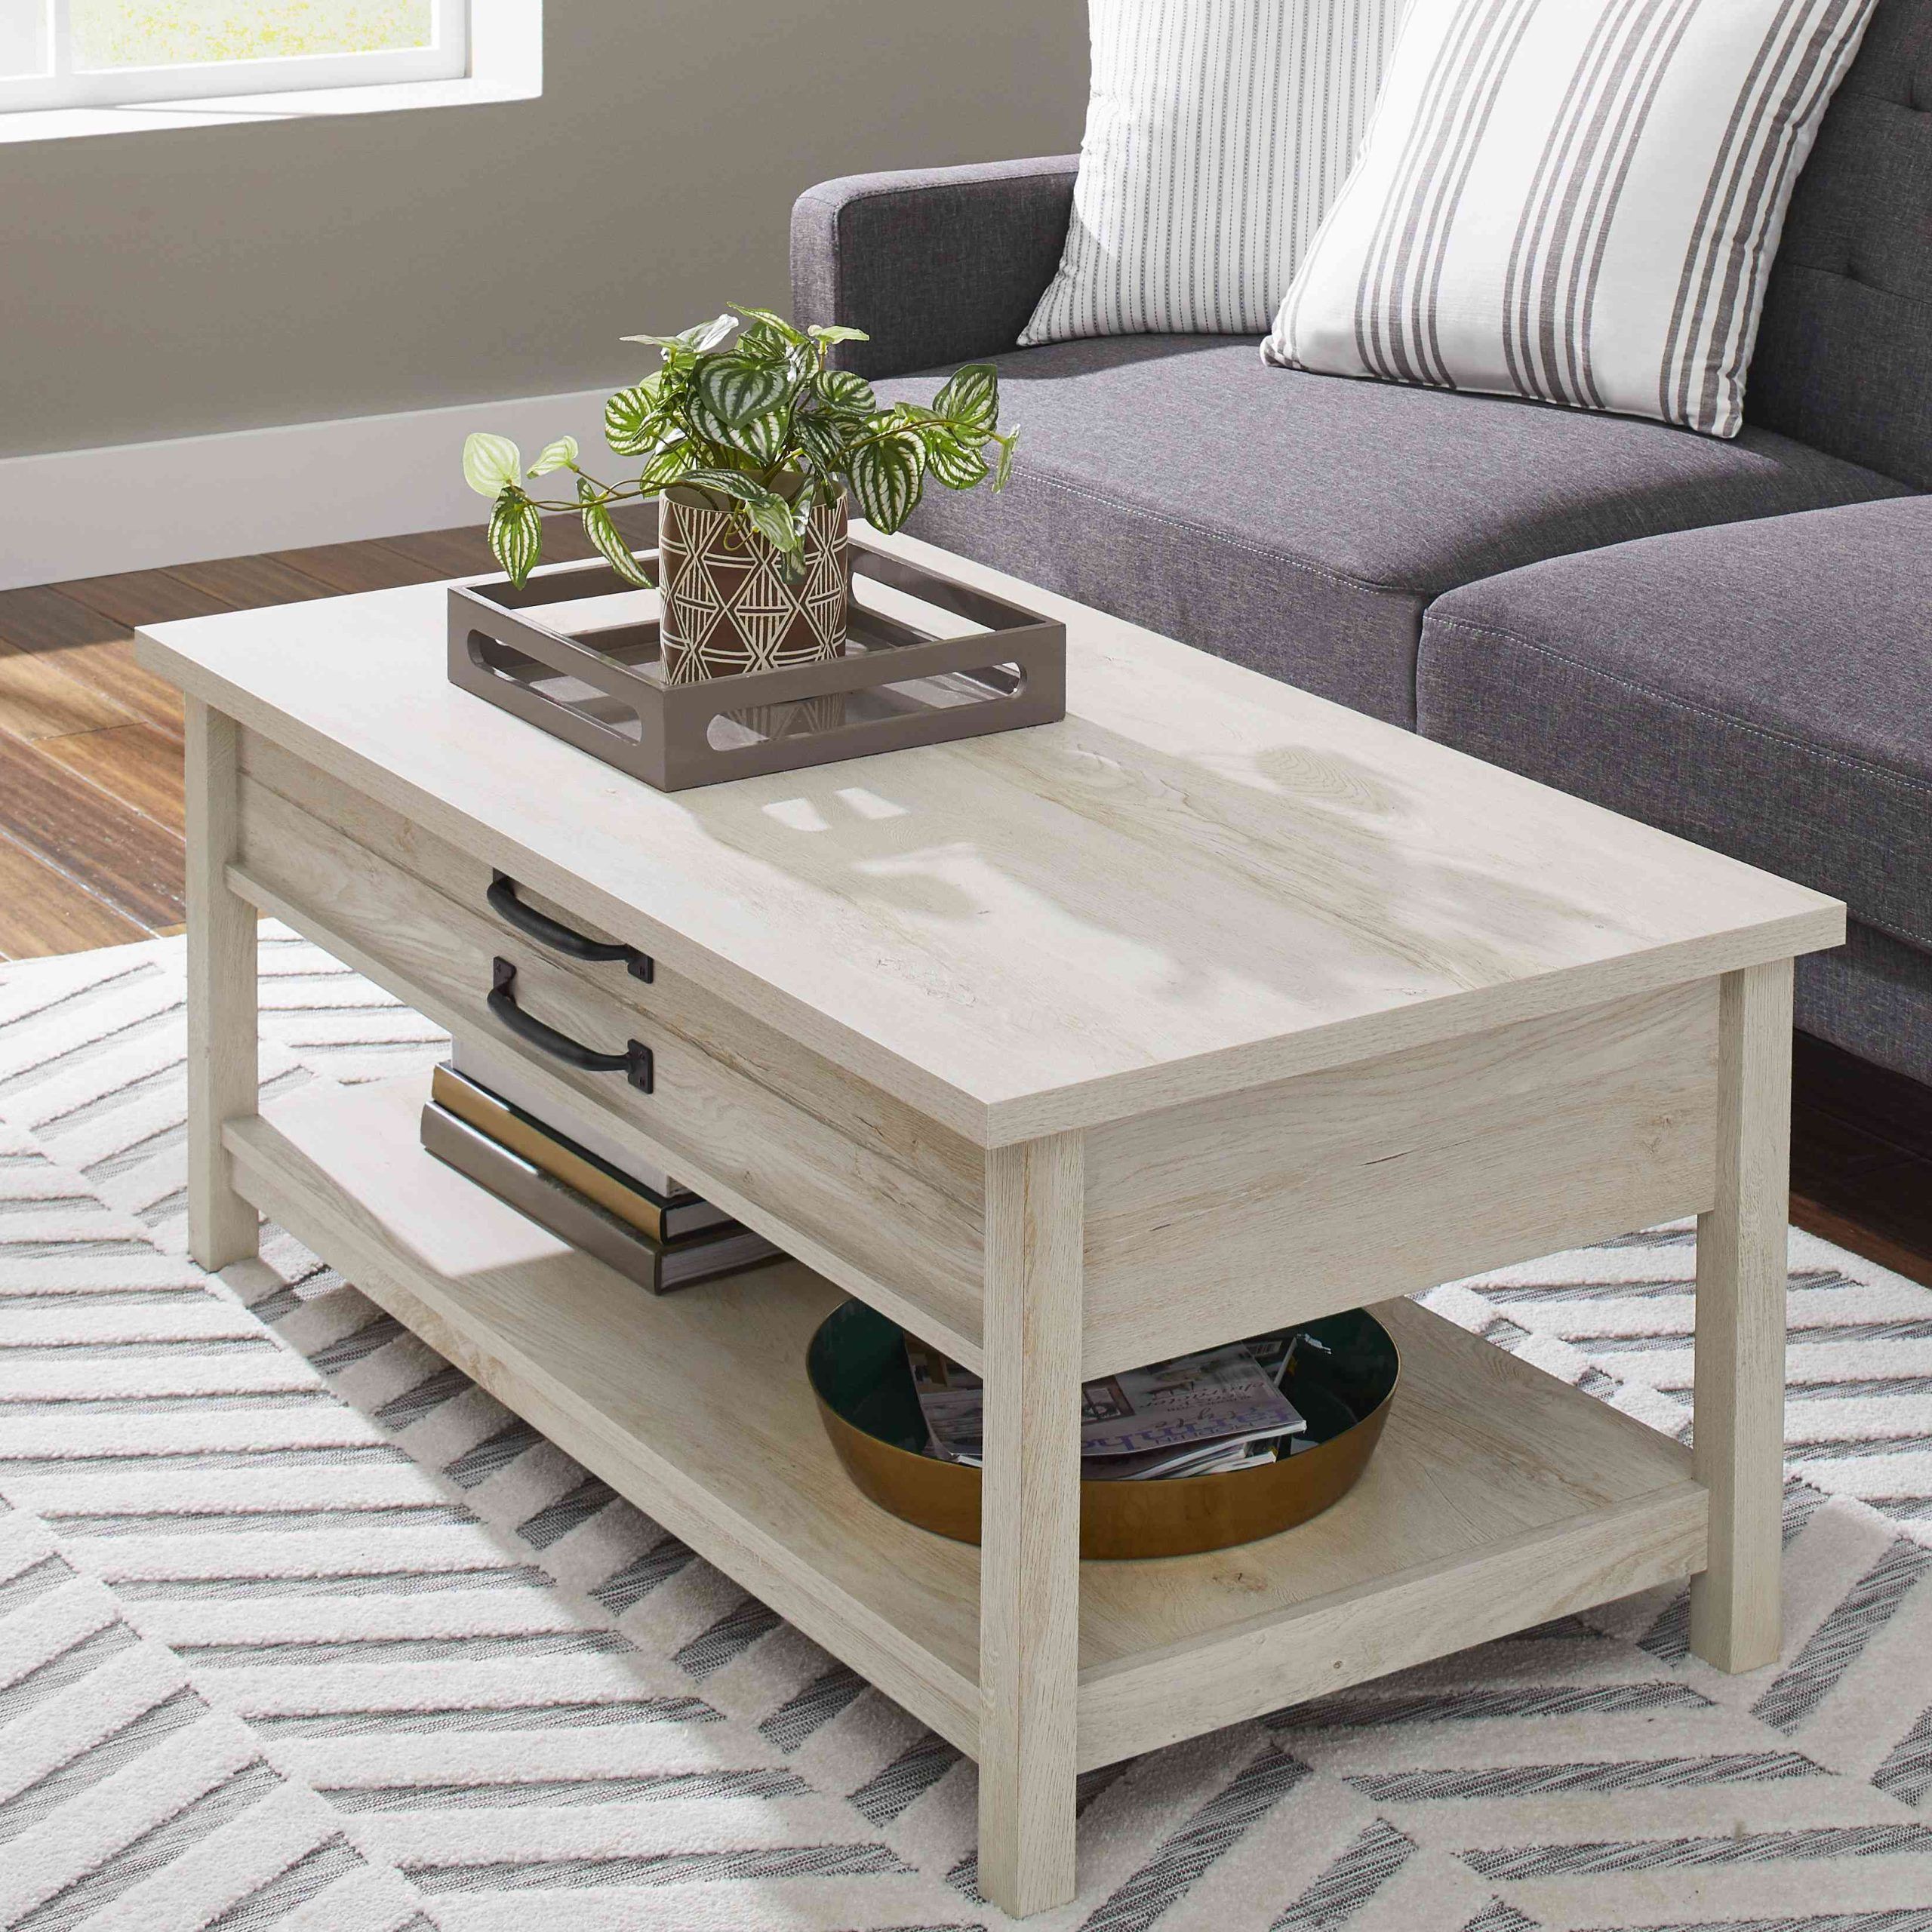 The 9 Best Lift Top Coffee Tables Of 2022 Within Wood Lift Top Coffee Tables (View 4 of 20)